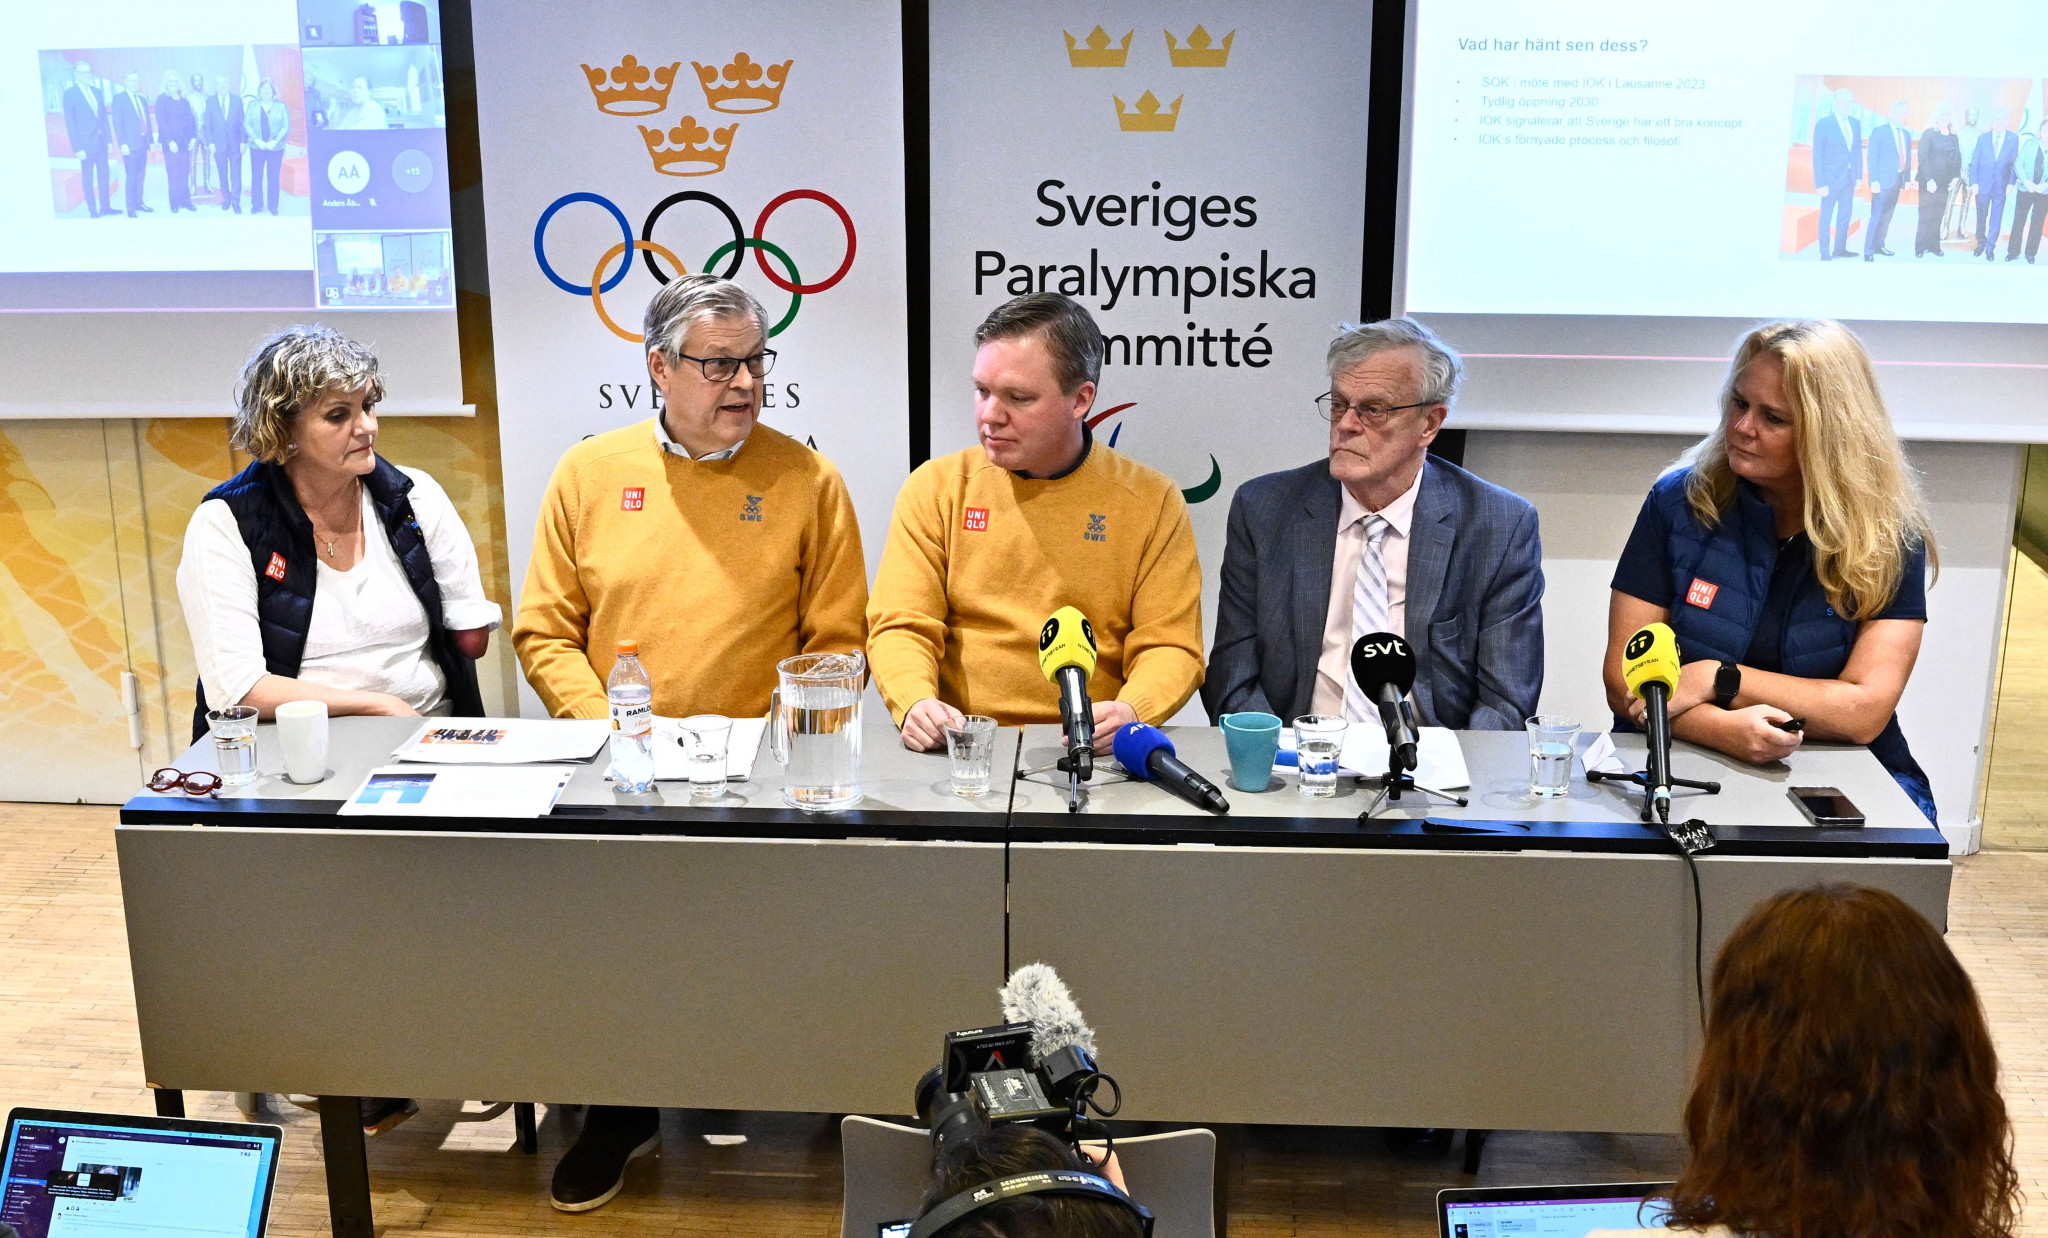 Hans von Uthmann, second left, will serve the remainder of Mats Årjes' term for two years before another election ©Getty Images